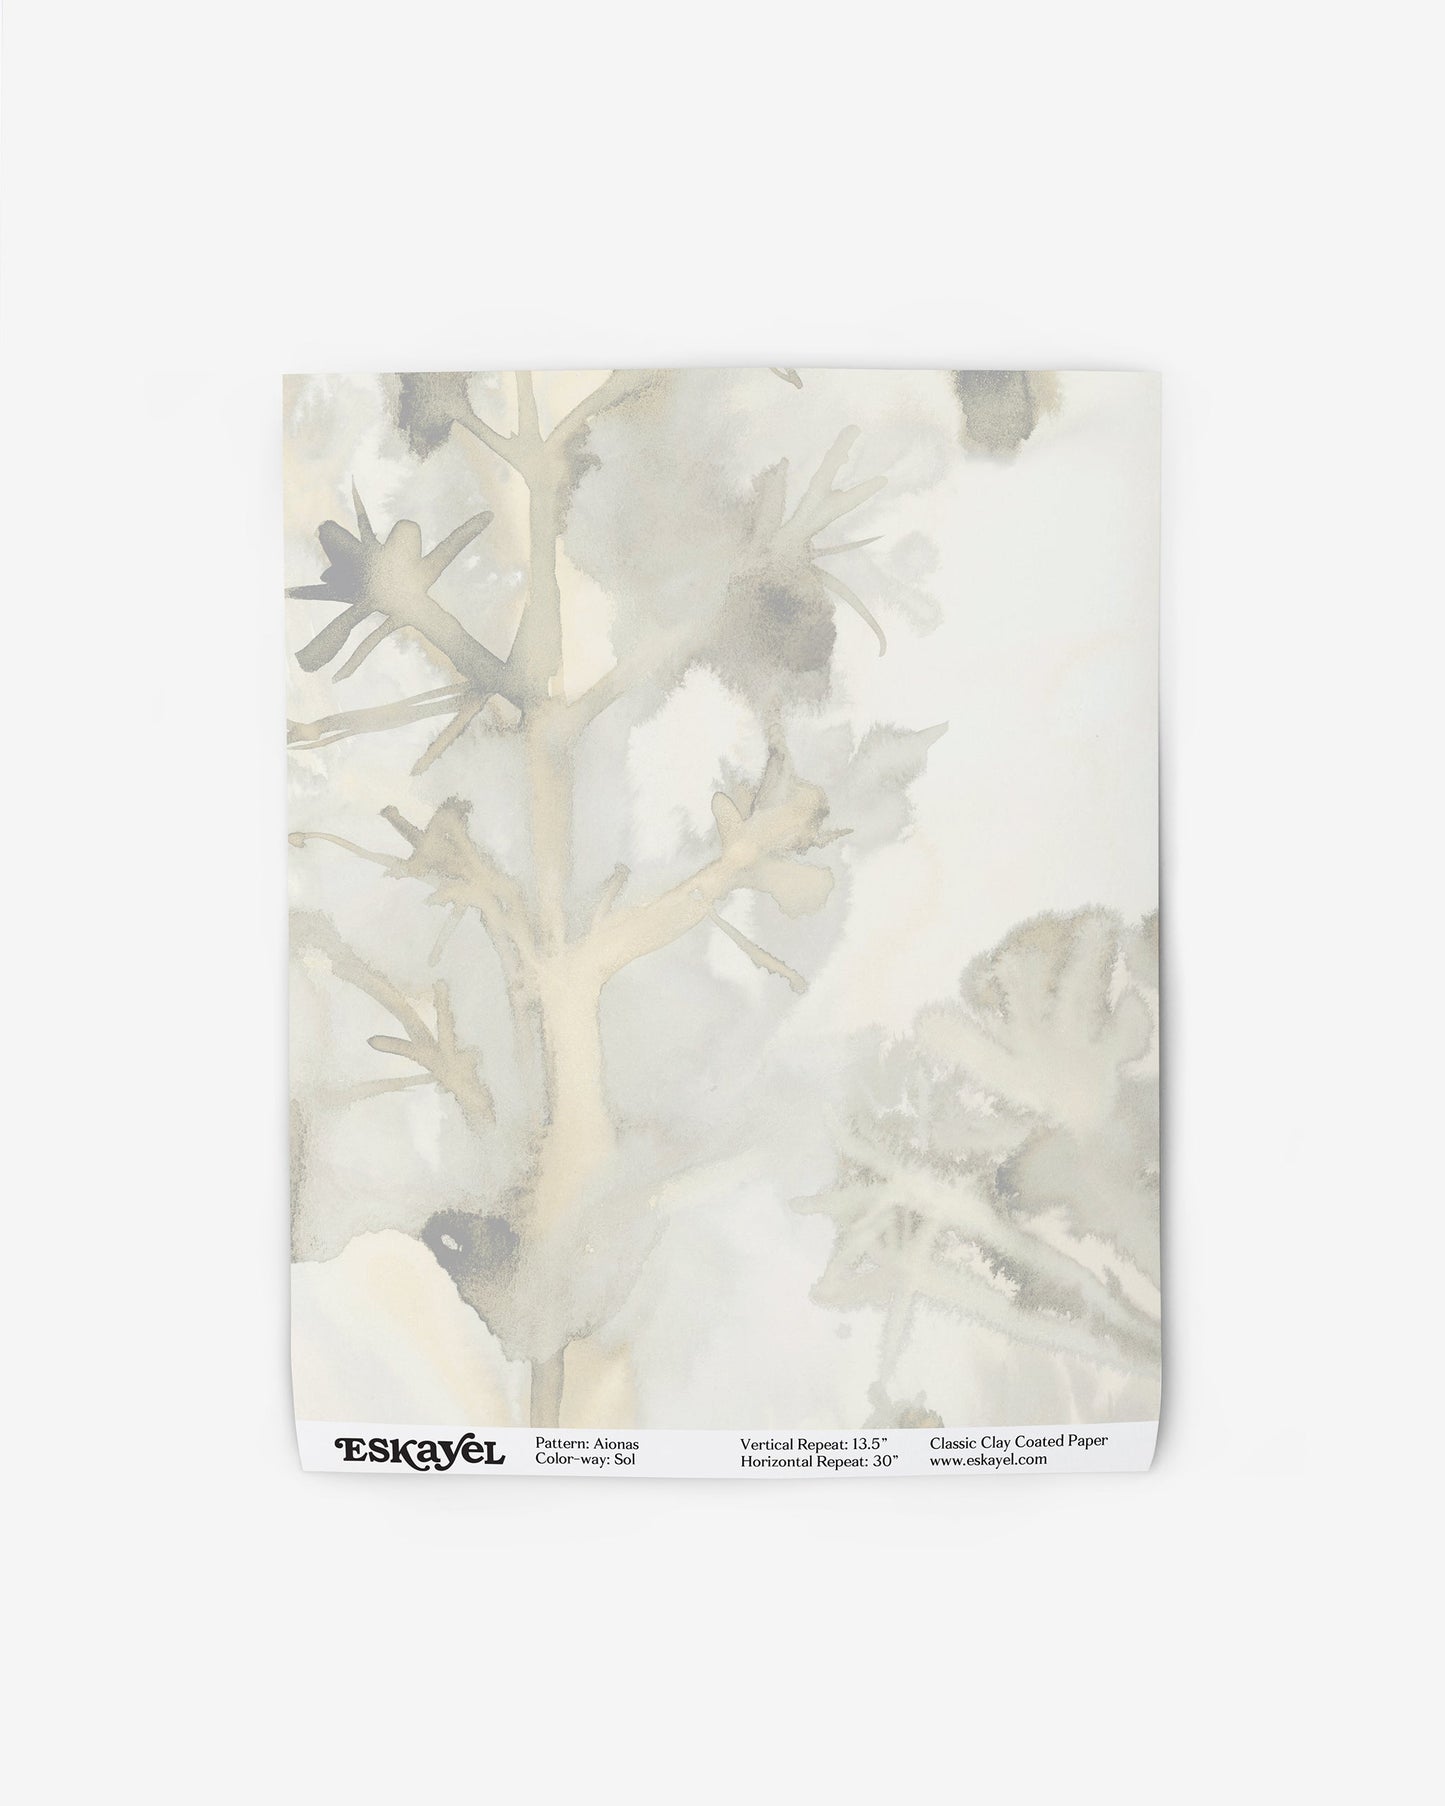 A white and gray Aionas Wallpaper with a floral pattern on it